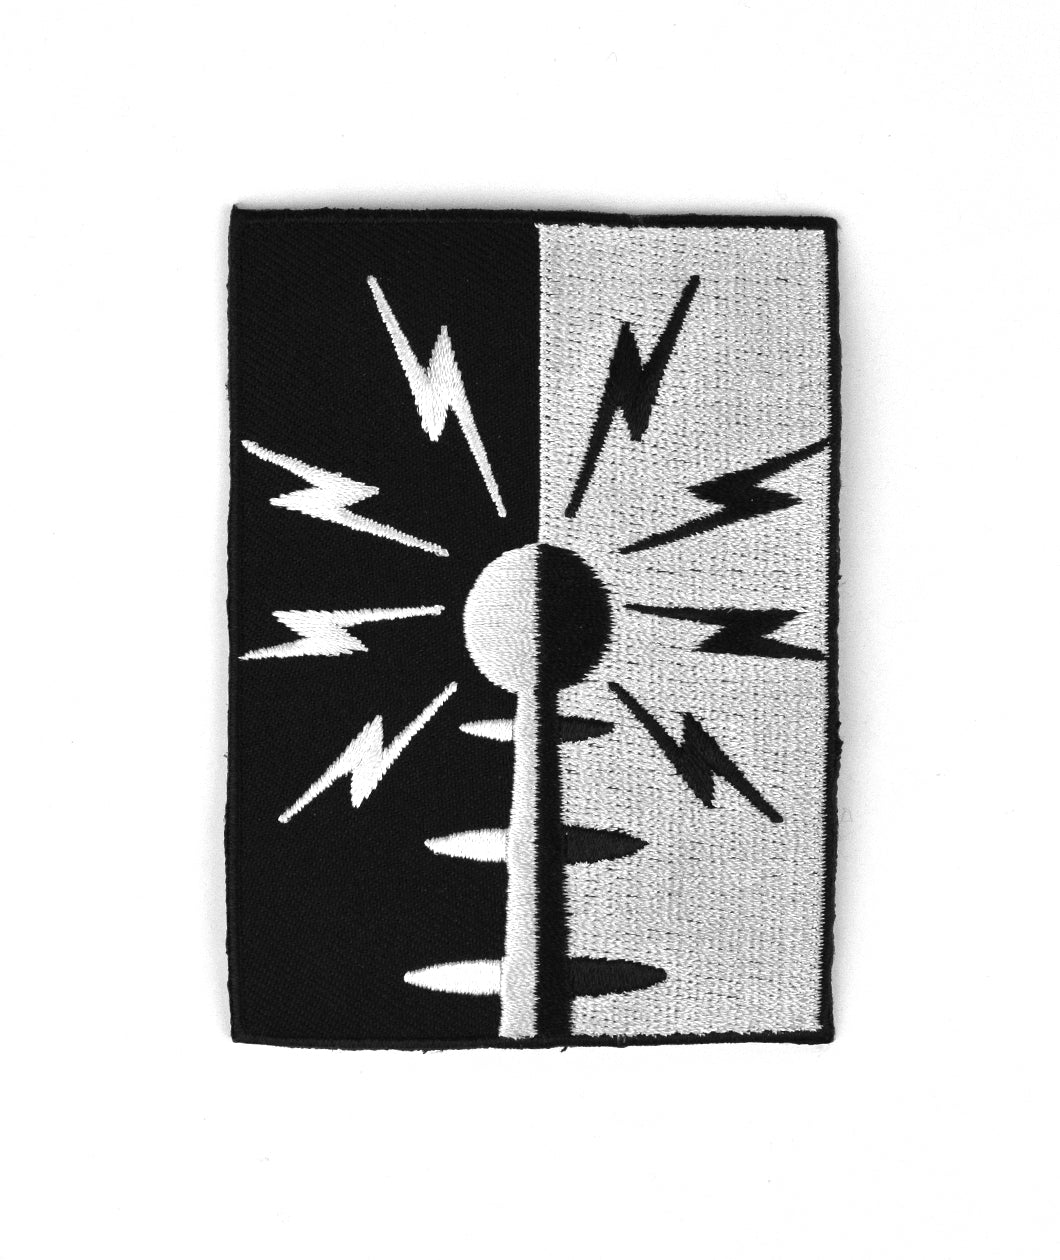 A vertical rectangular patch half black and half white. There is a circle in the center on top of a cone with three ovals going down the cone. Eight lightning bolts surround the circle. Half of image is white and half is black - from Tesladyne